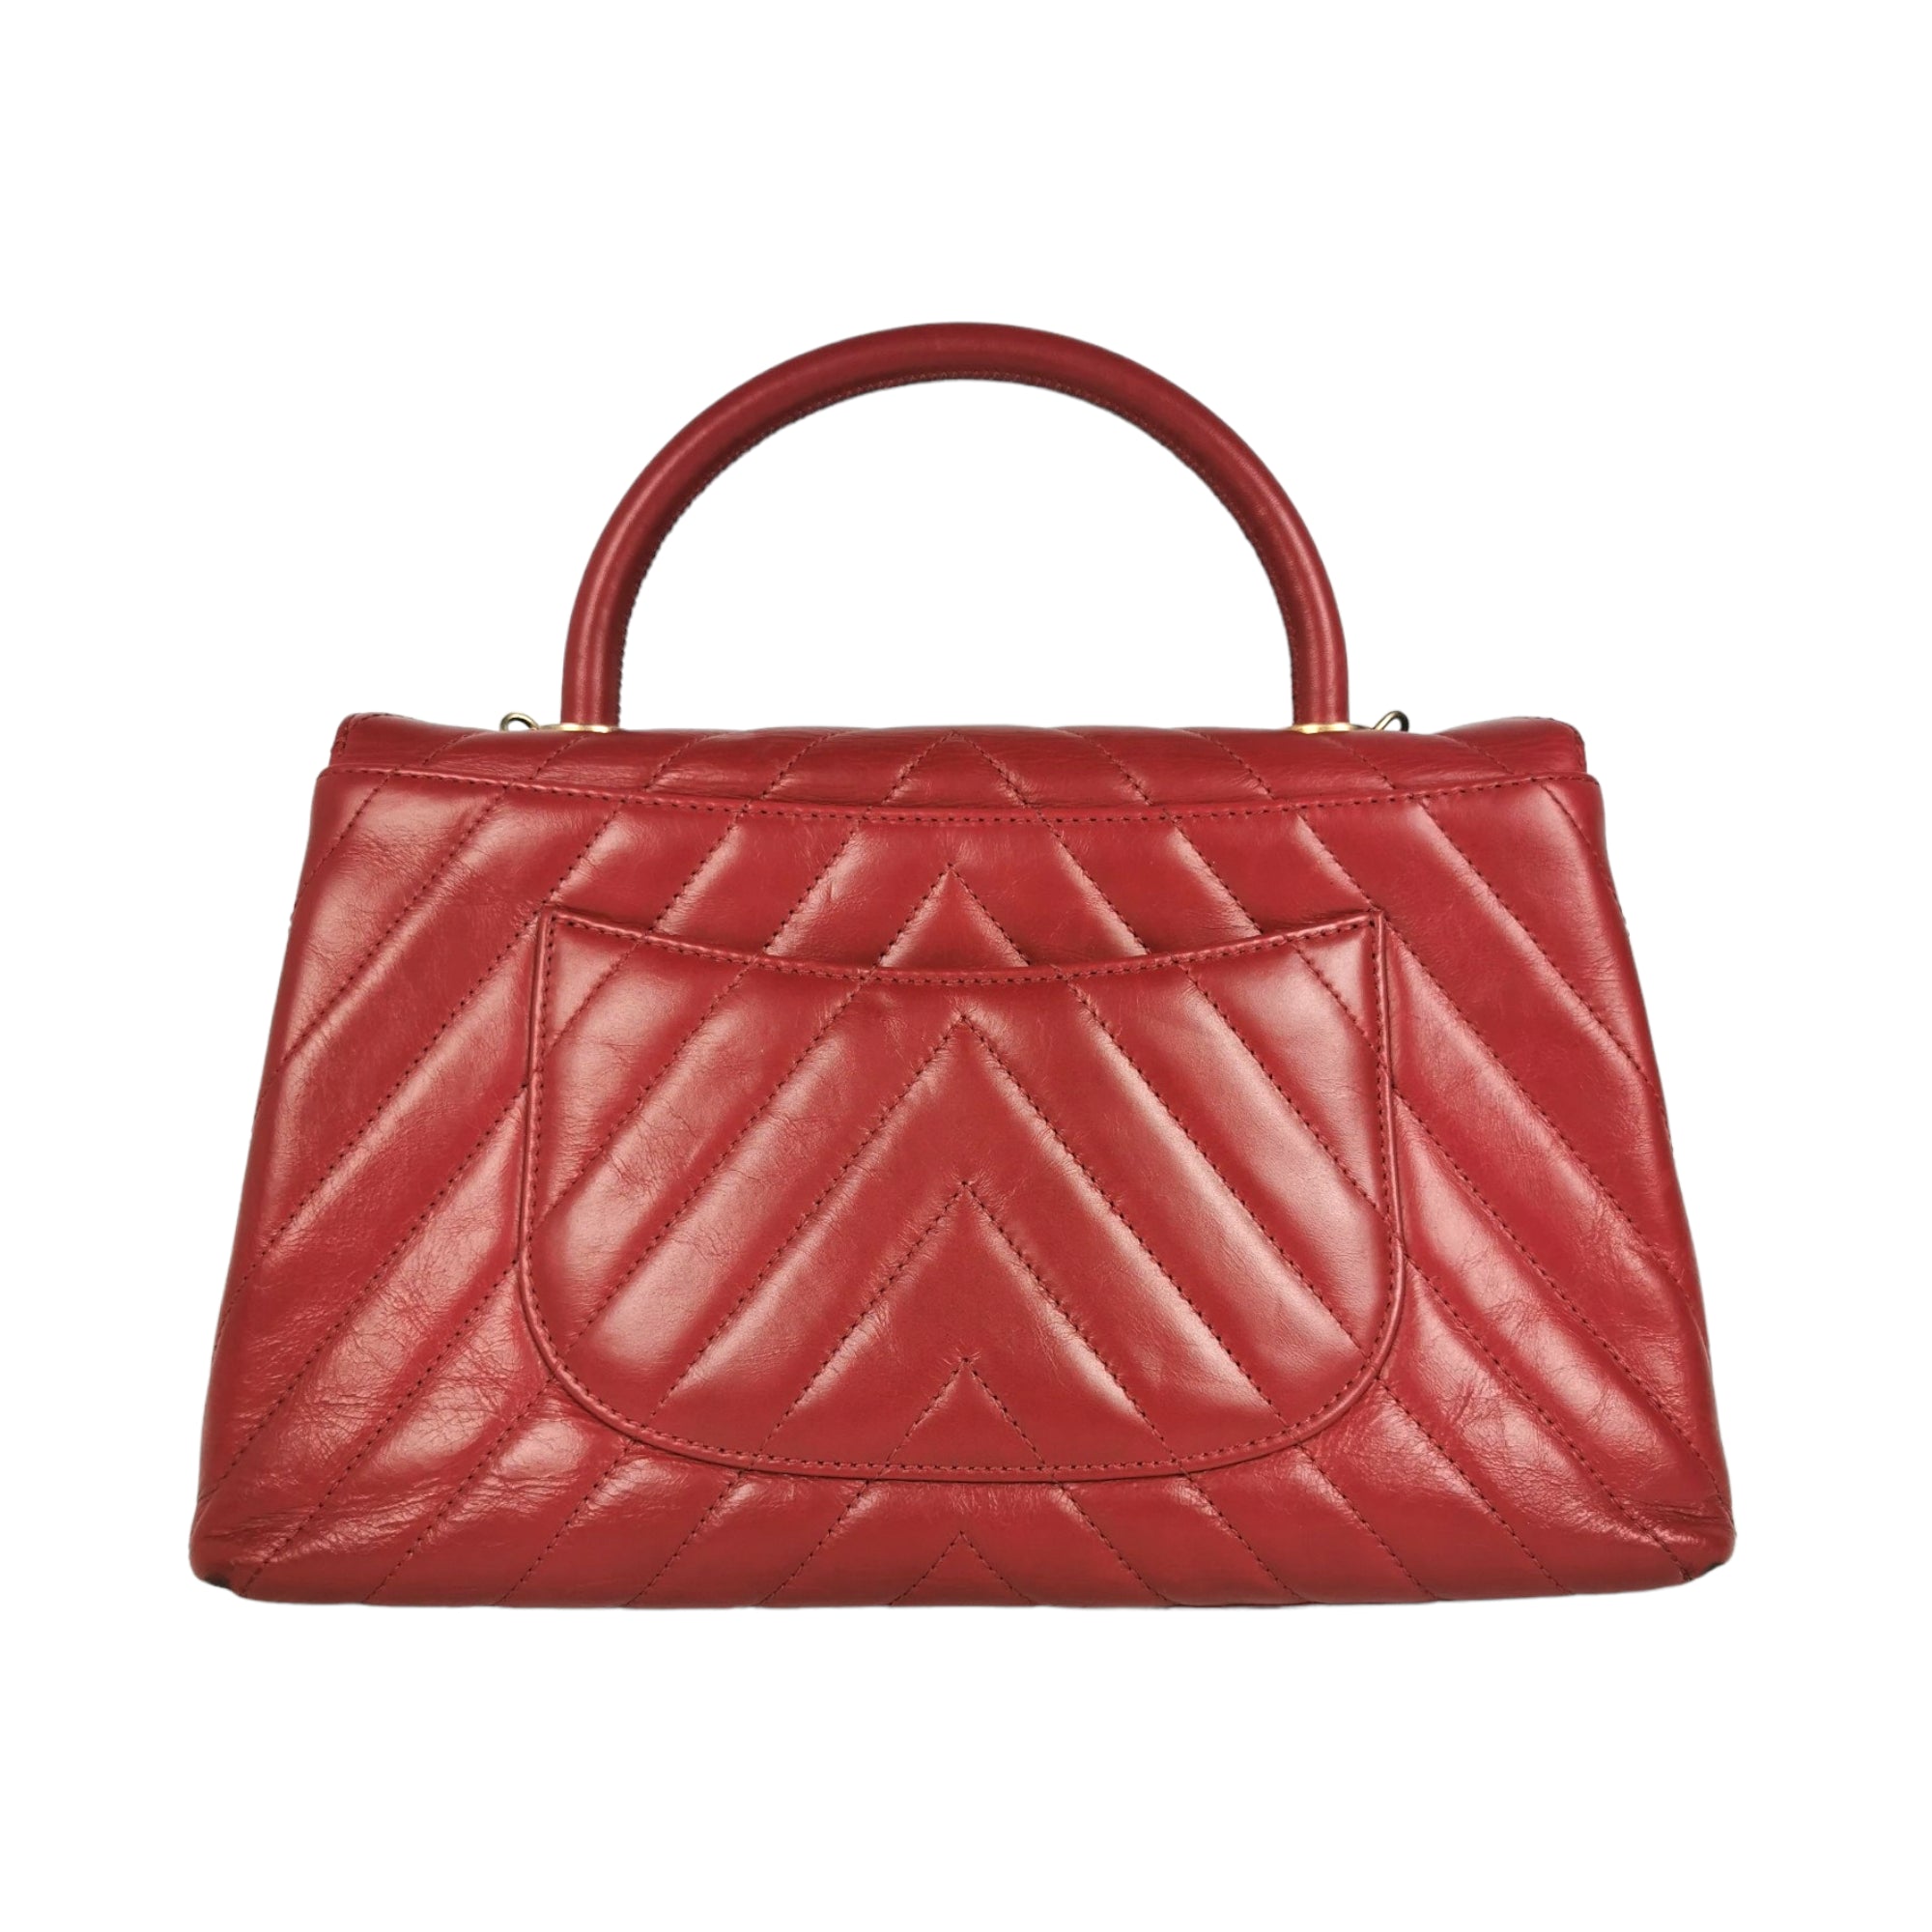 Coco handle leather handbag Chanel Red in Leather - 26446788